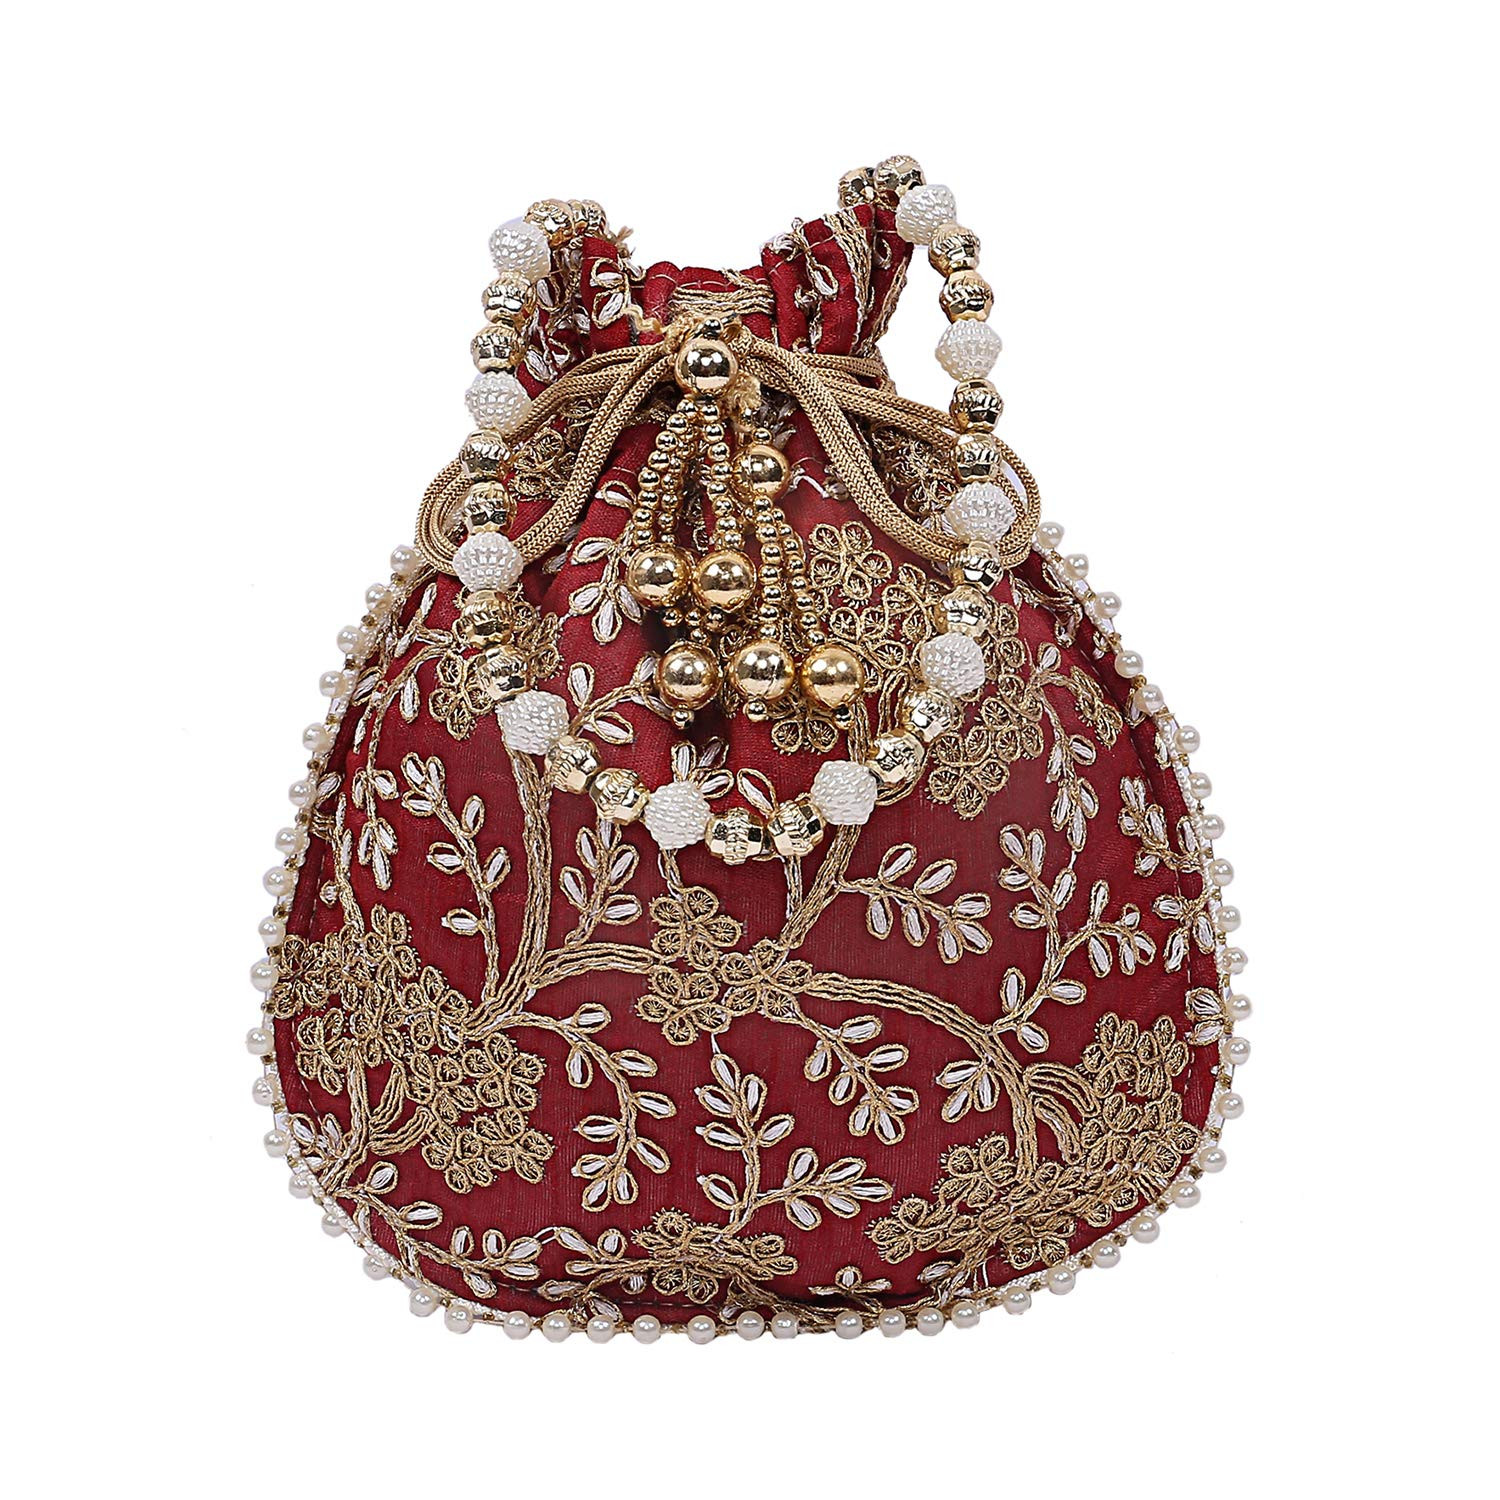 Kuber Industries Embroidery Drawstring Potli|Hand Purse With Gold Pearl Border & Handle For Woman,Girls (Maroon)